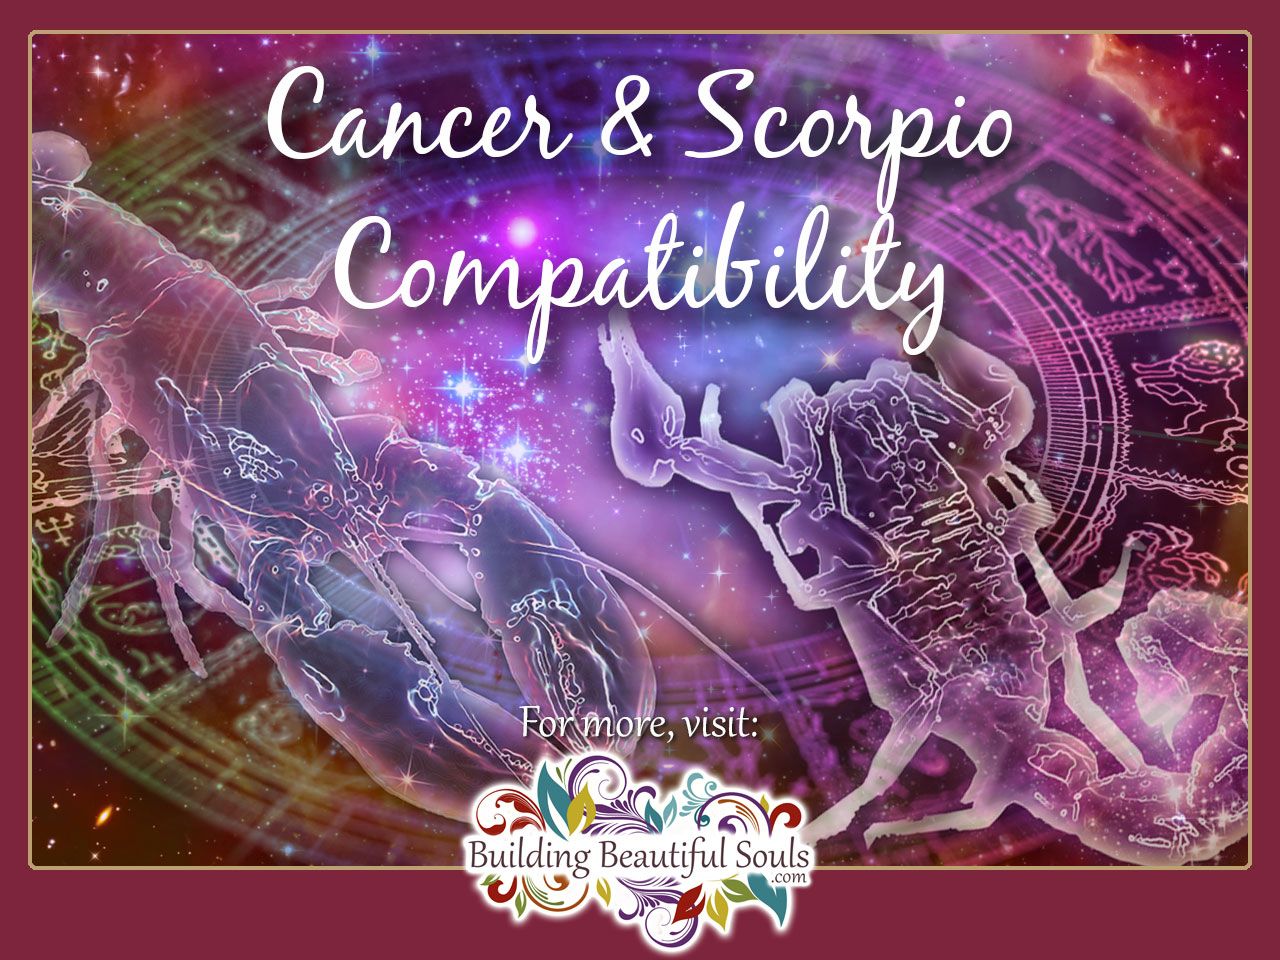 Back scorpio man wants cancer woman Here's What